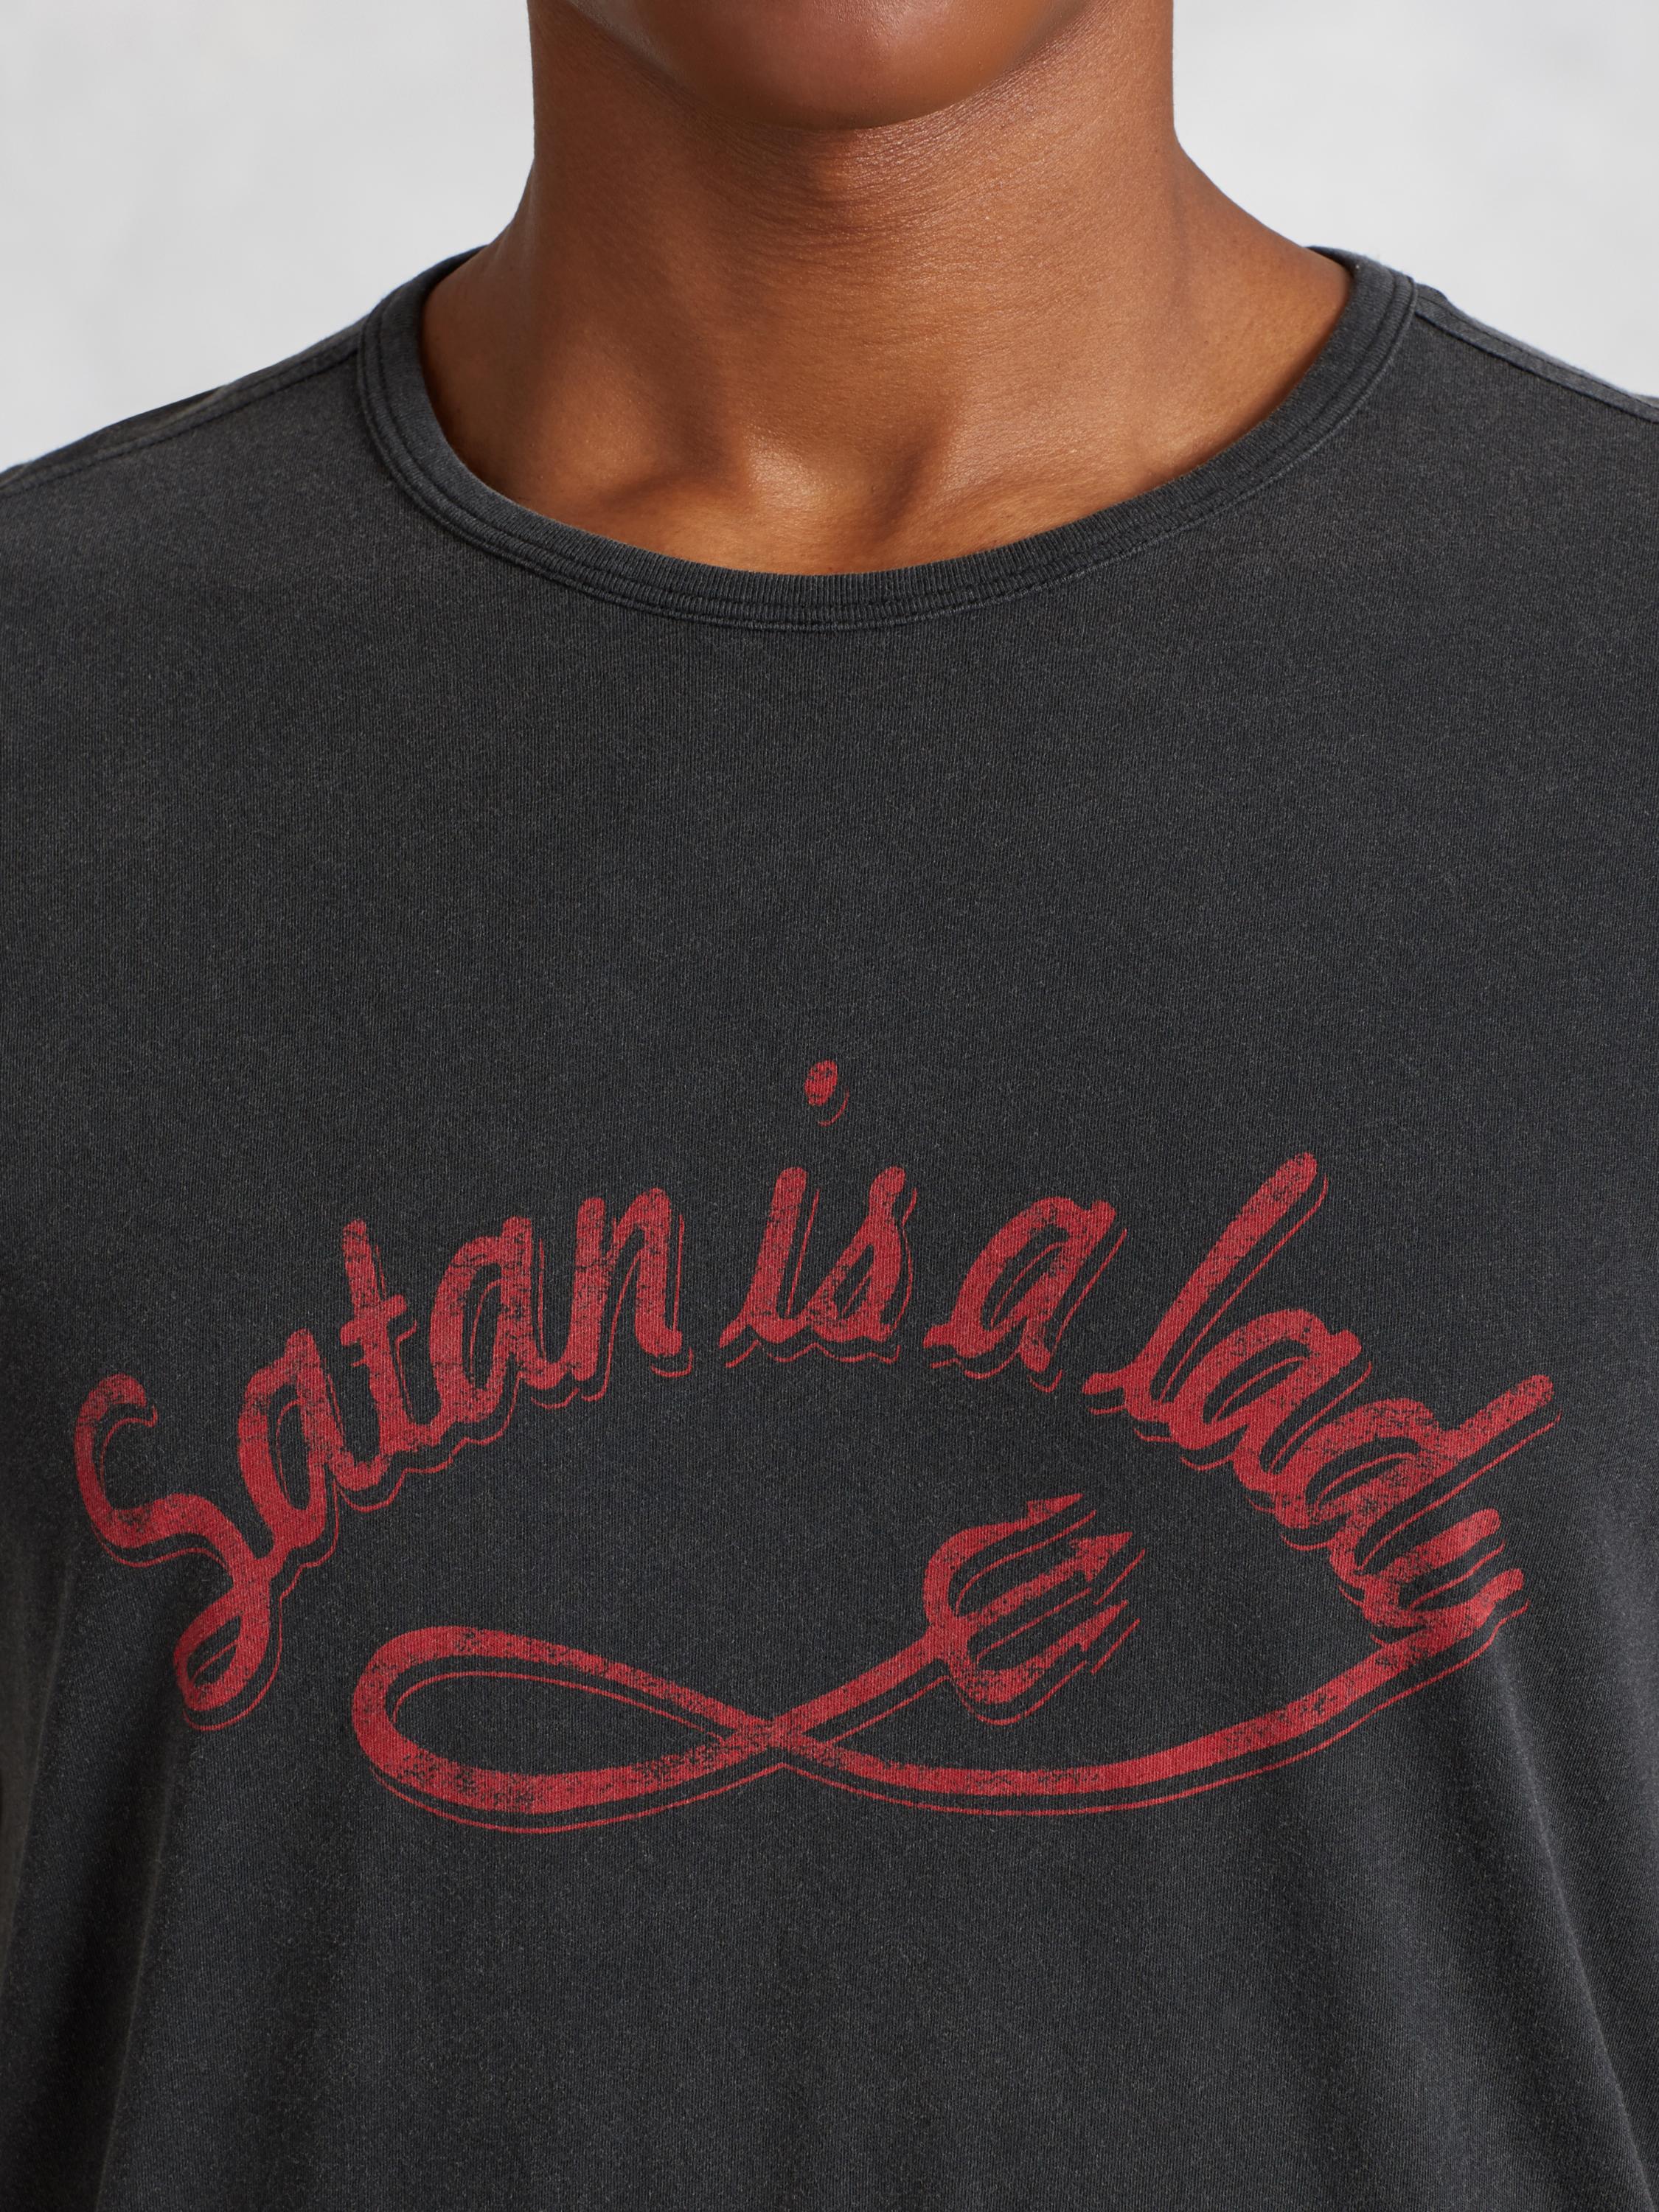 Satan Is A Lady Graphic Tee image number 3